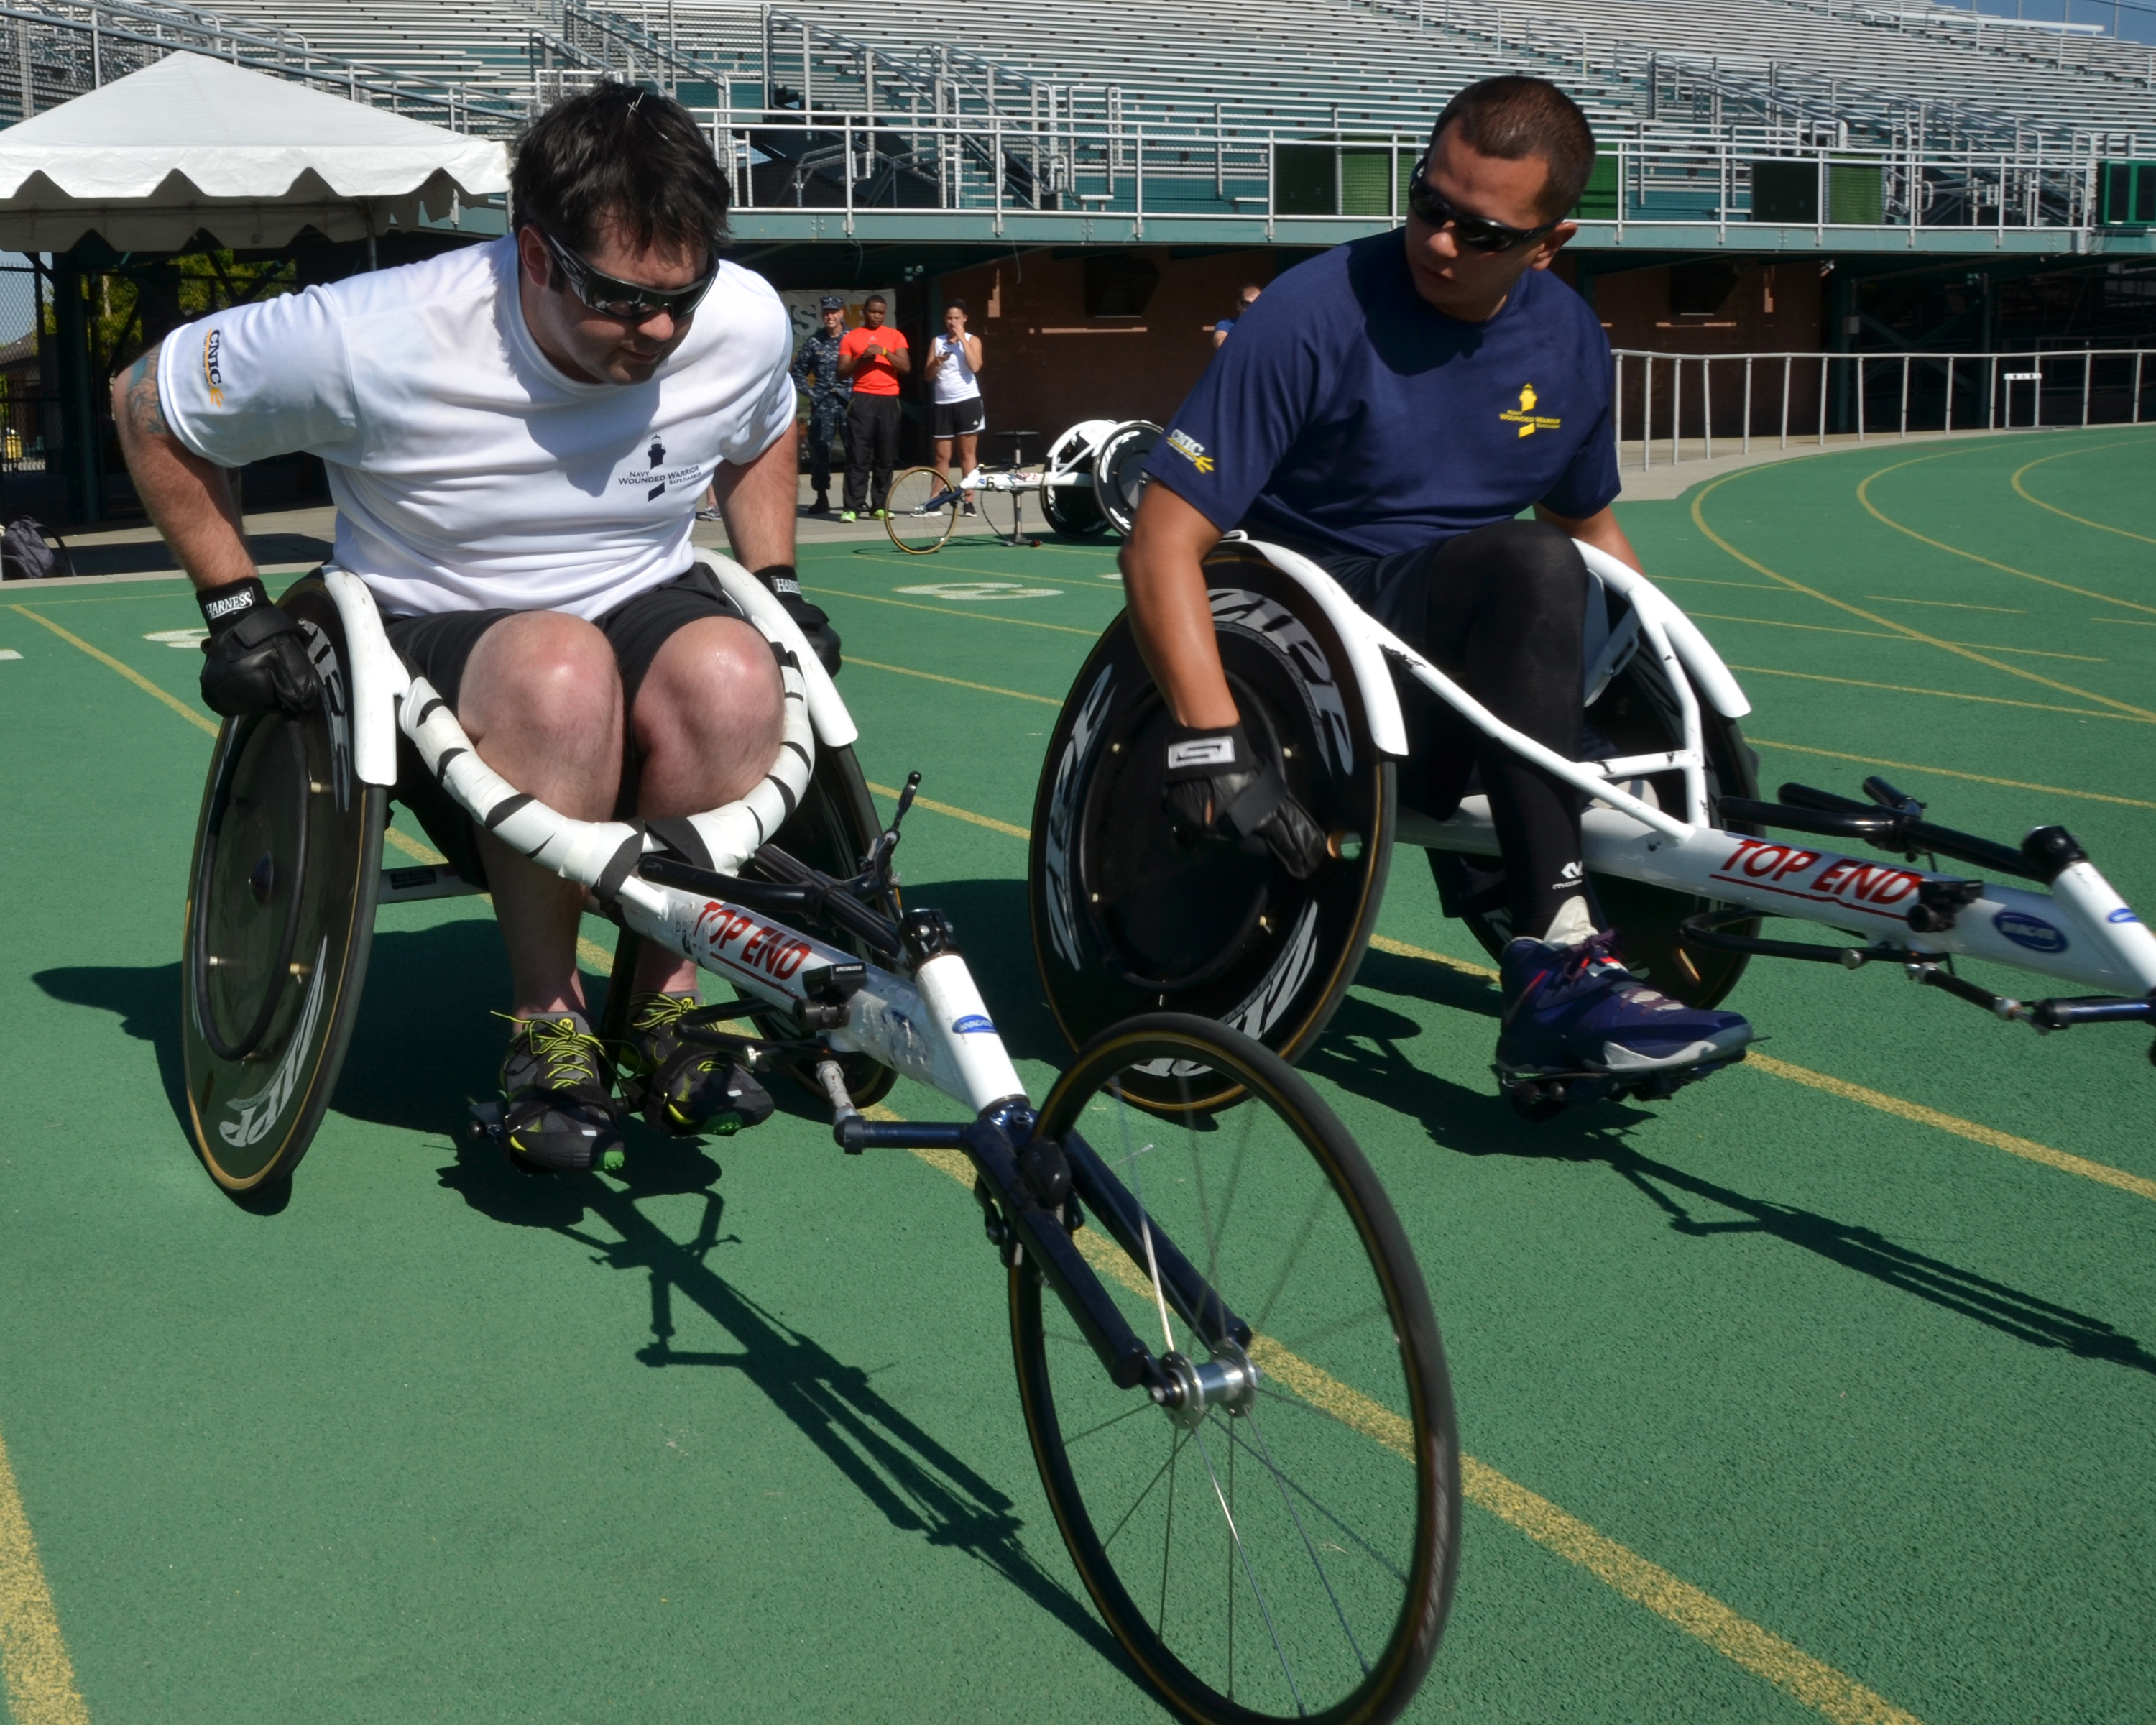 Explosive Ordnance Disposal Senior Chief Austin Reese (left) and another athlete begin a practice run on their racing wheelchairs during the Wounded Warrior Navy Trials in 2014. U.S. Navy photo by Mass Communication Specialist 1st Class Erik Wehnes.